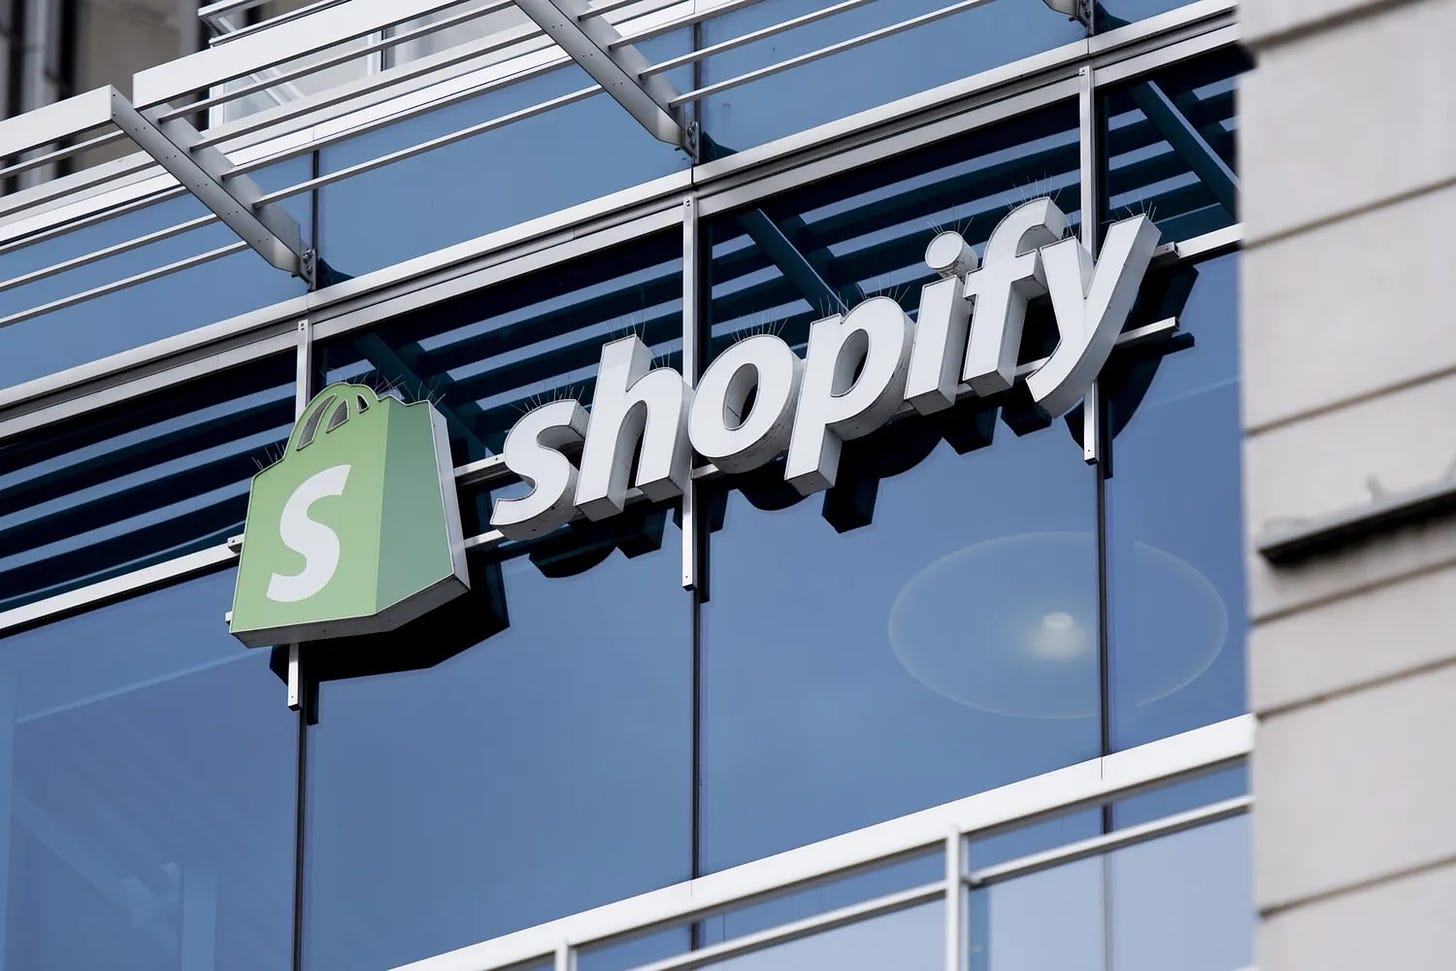 Shopify unveils partnerships with Apple, Google and Twitter, offers crypto  feature - The Globe and Mail